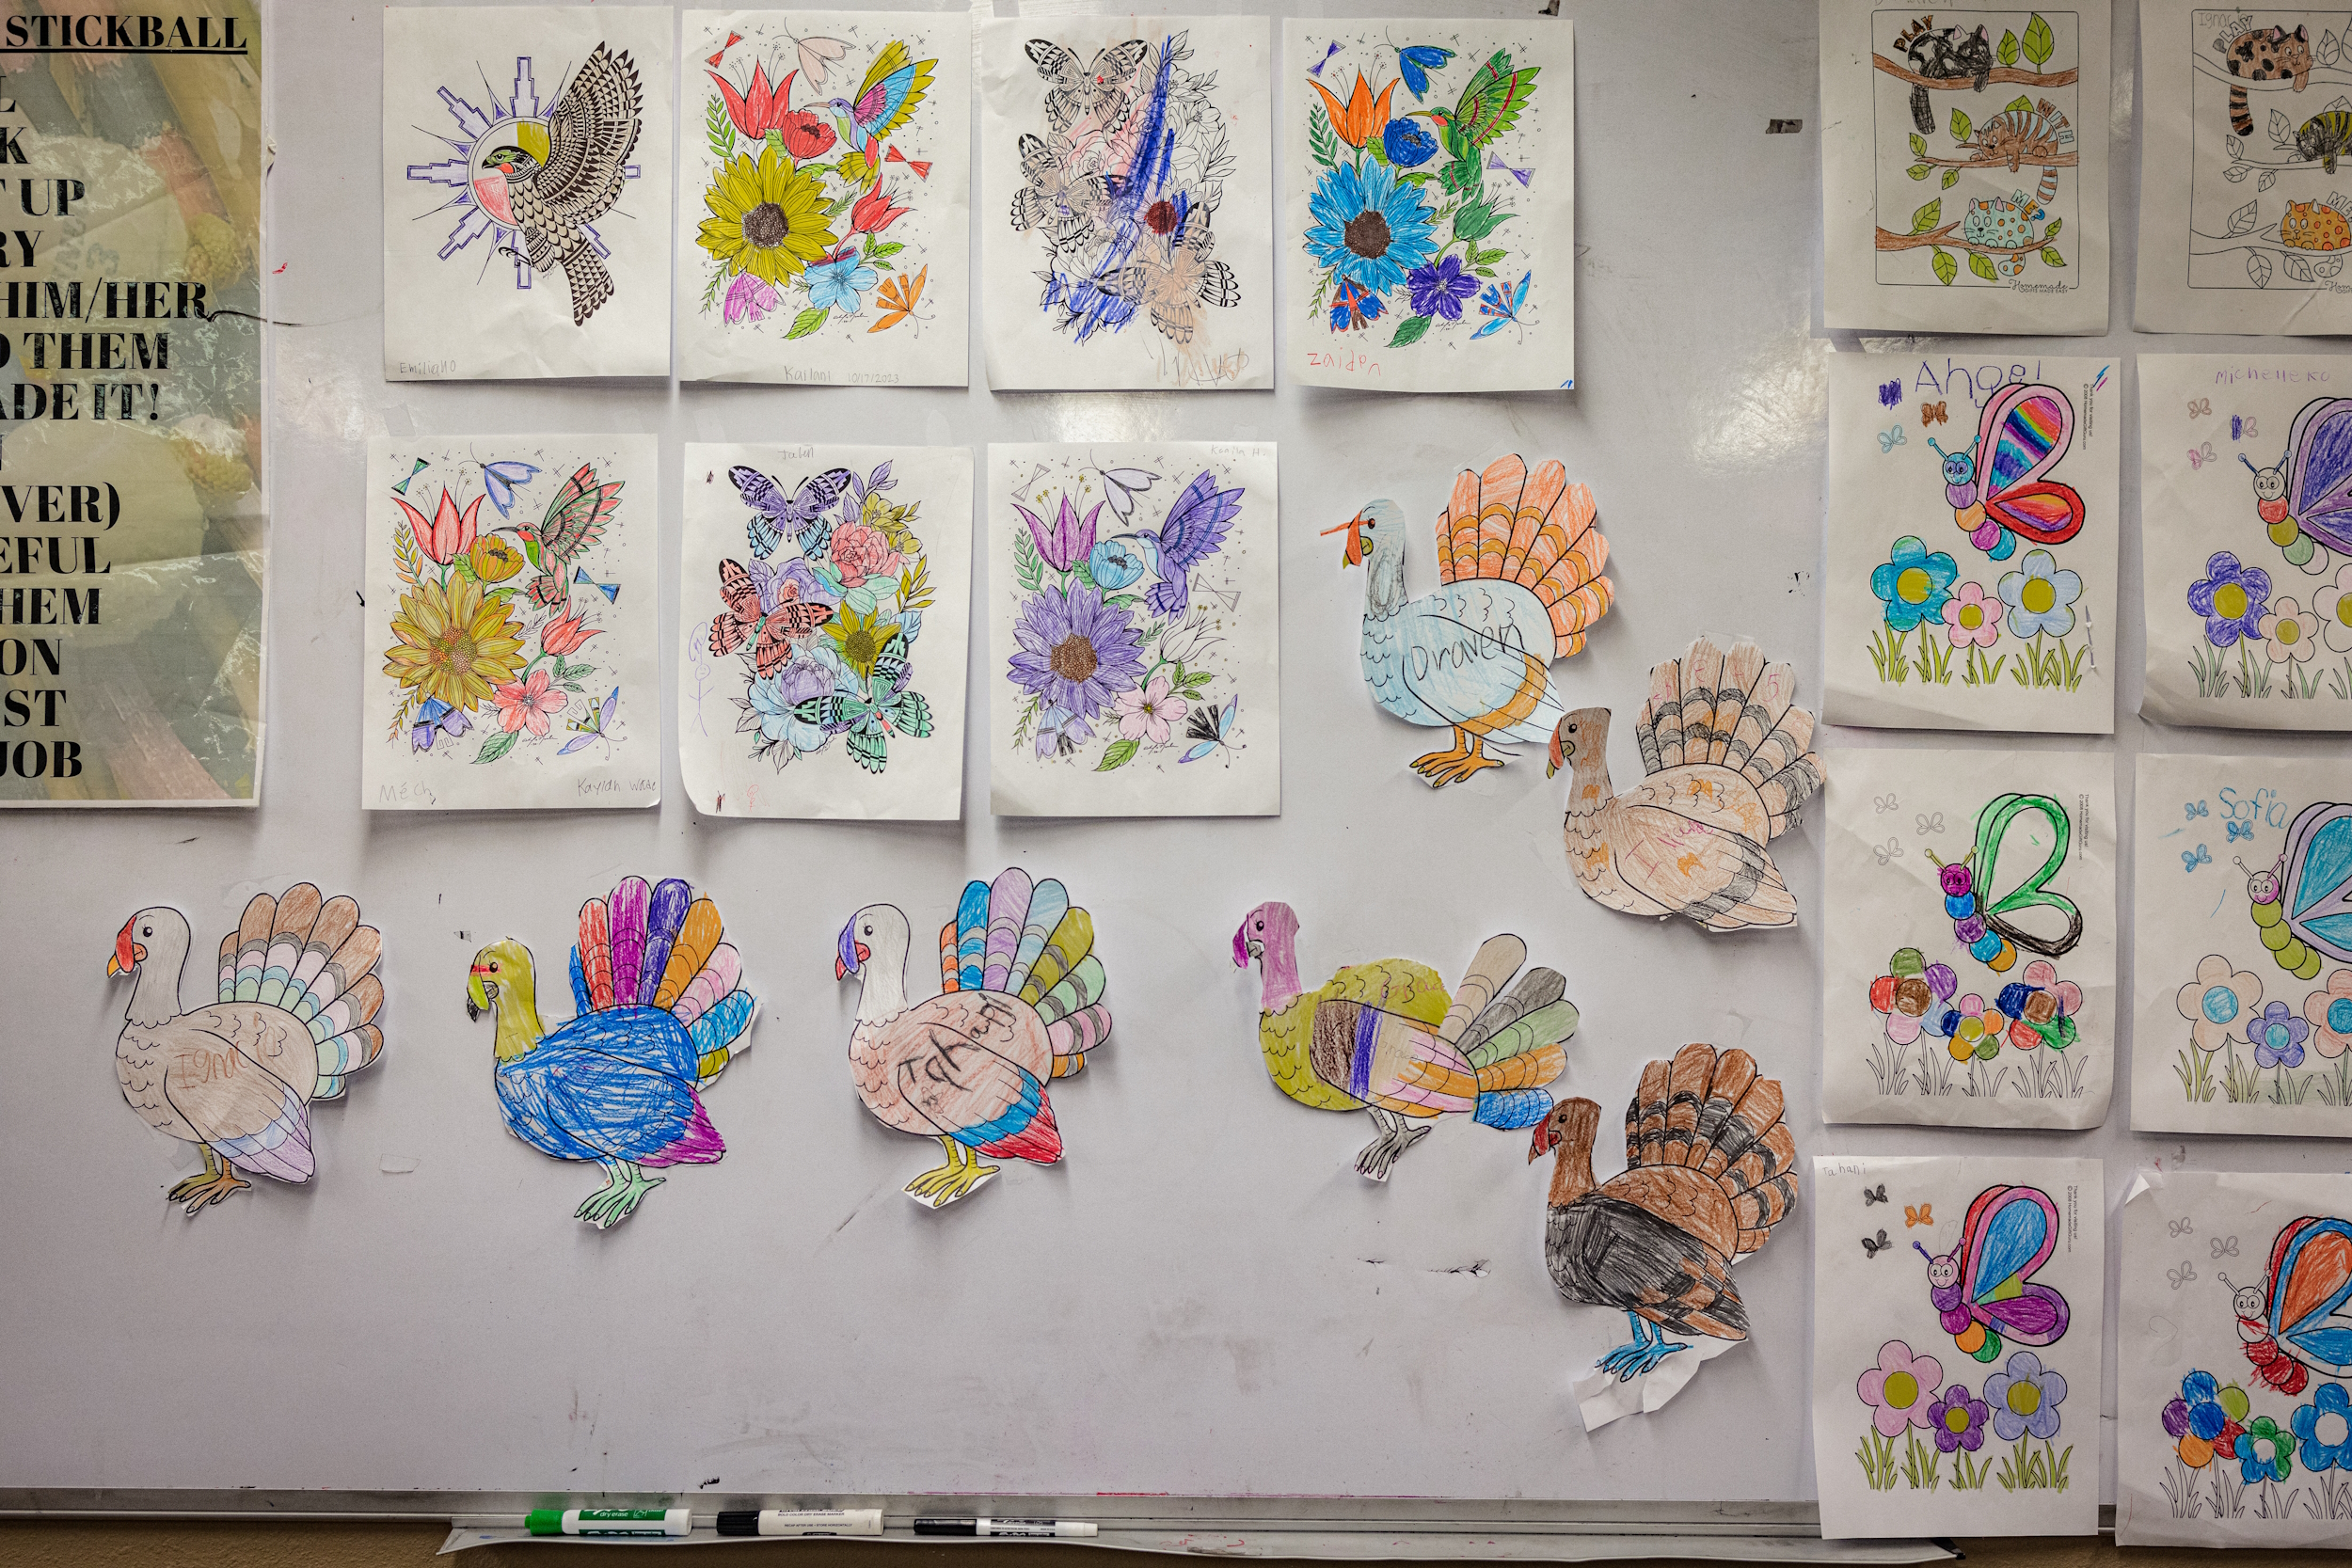 Native American Charter School; Bulletin board covered with white paper and several coloring book pages of flowers and turkeys and butterflies colored in pinned on the board